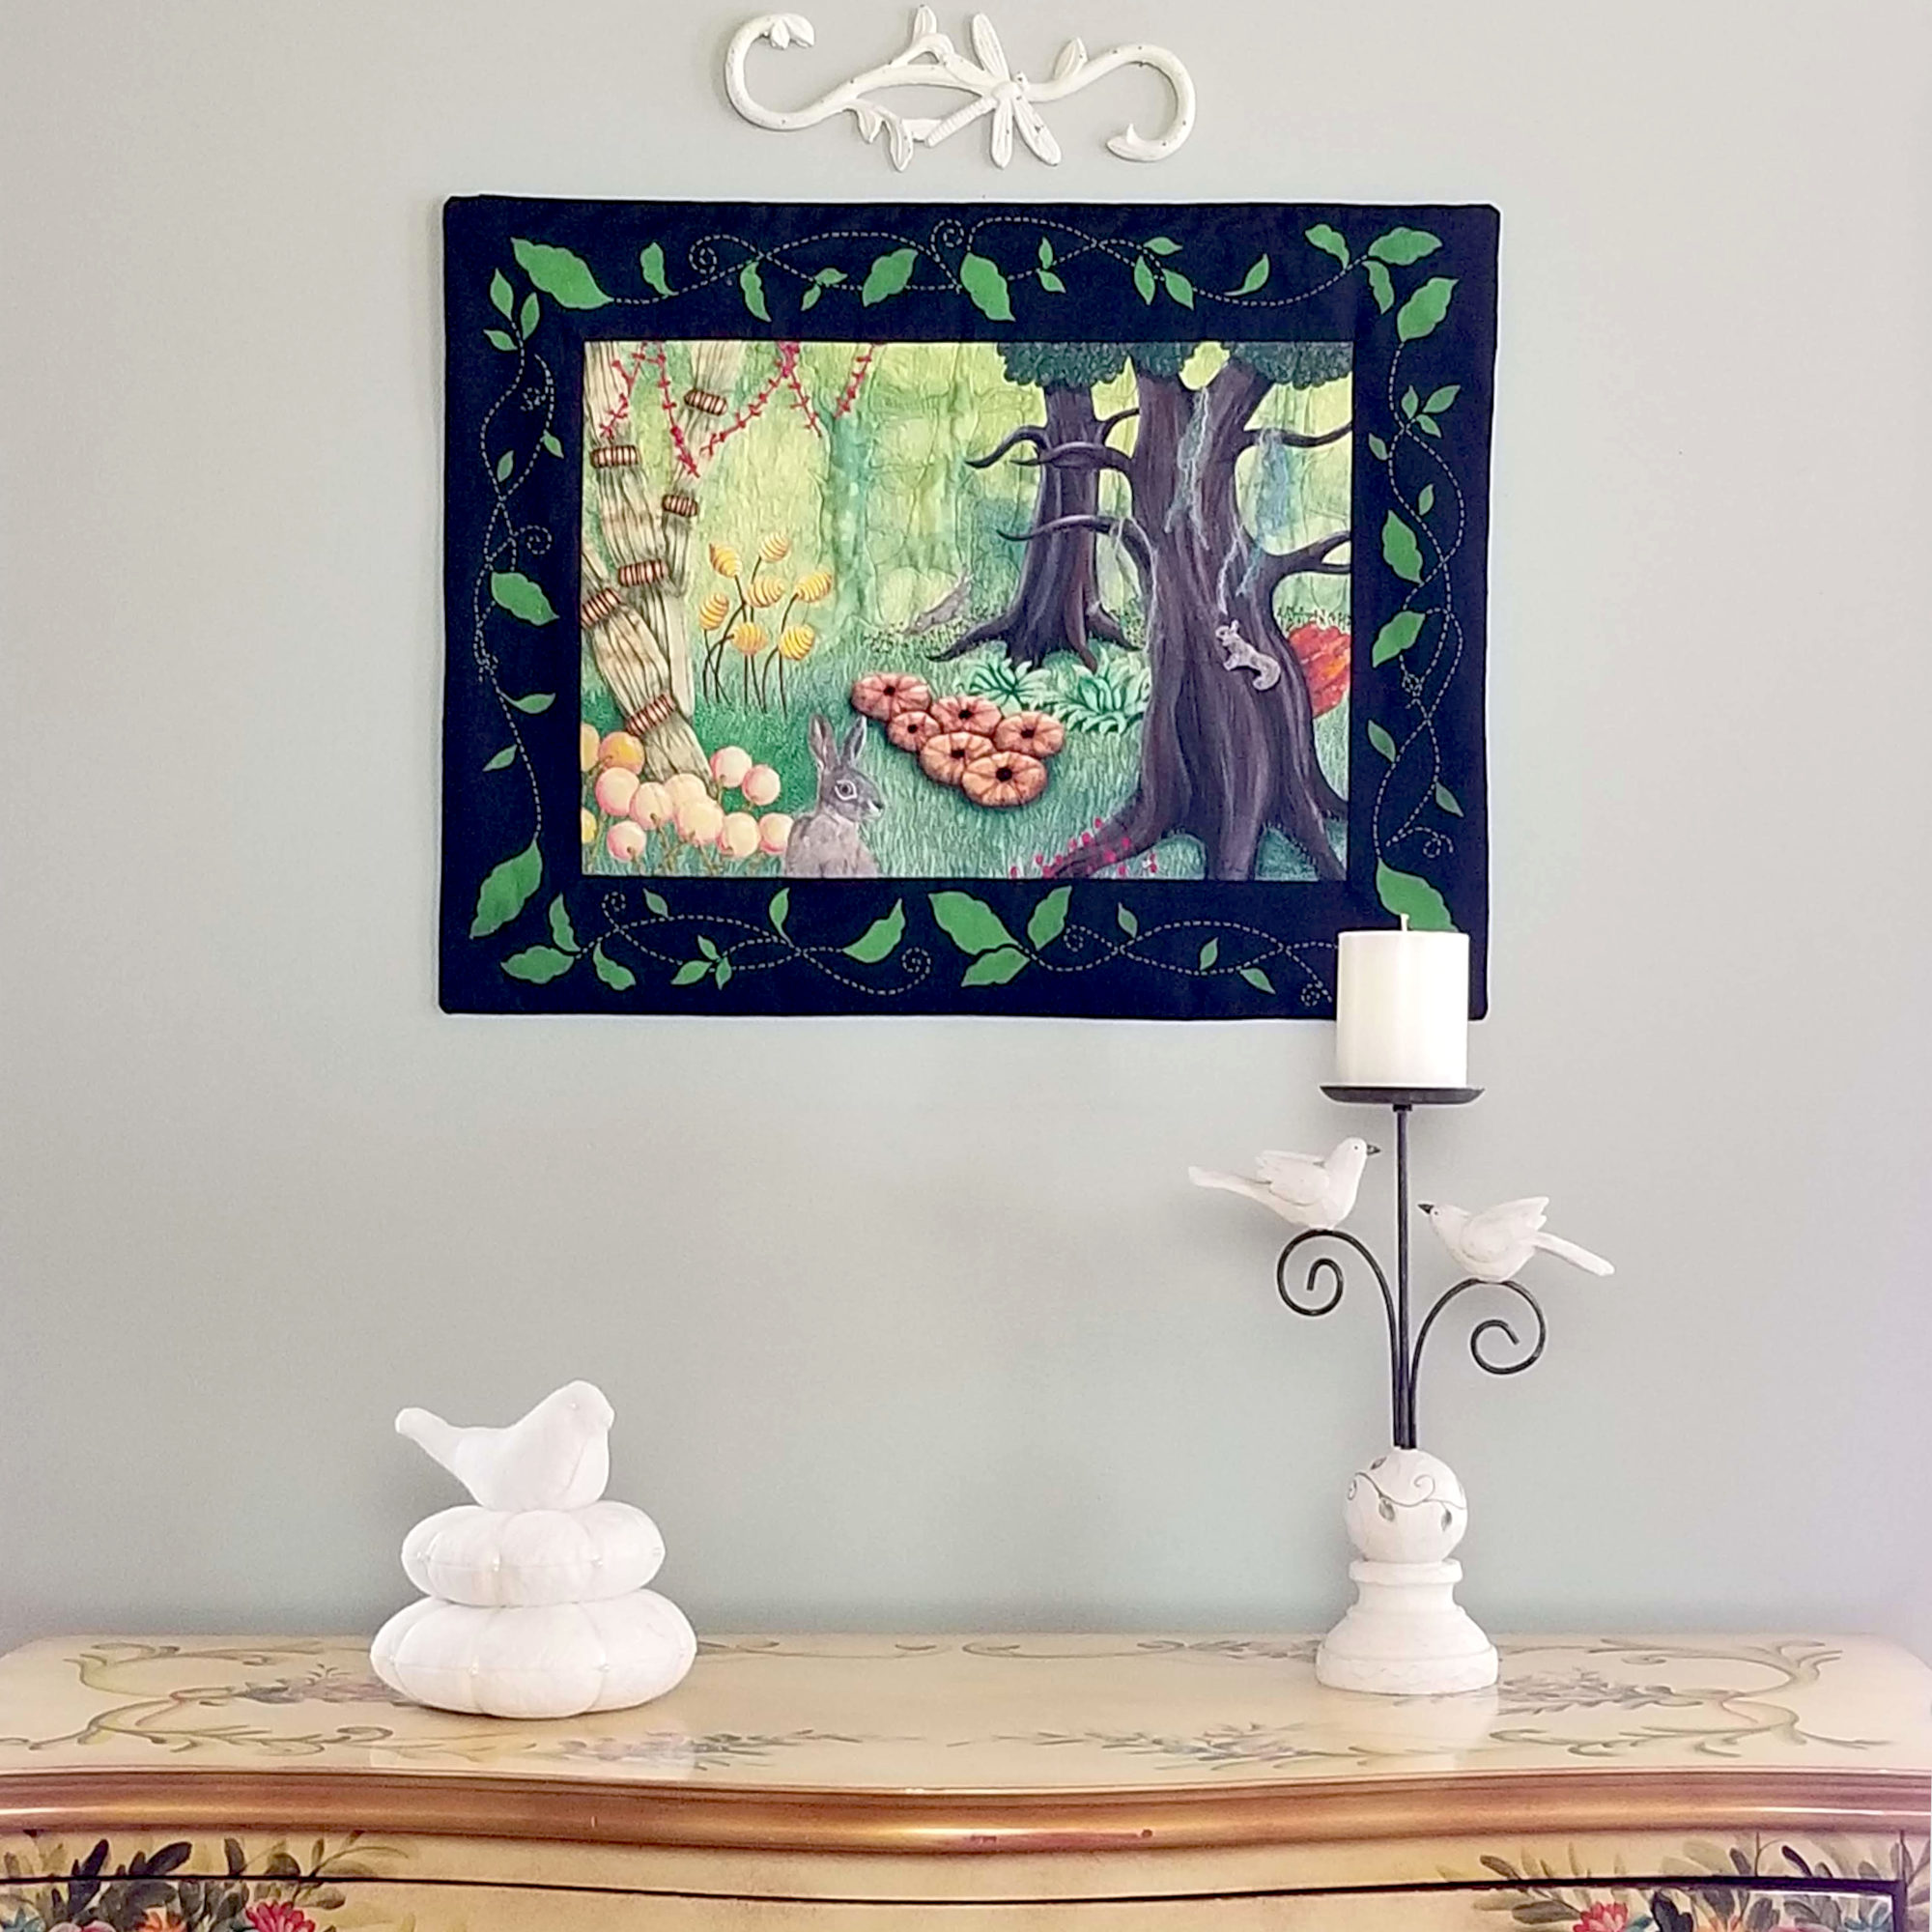 Textile artwork Cache-Cache on a wall above a sideboard where there is a bird on a nest and a candlestick with birds. The artwork shows a scene of 2 hares and a squirrel playing hide and seek in an enchanted forest.